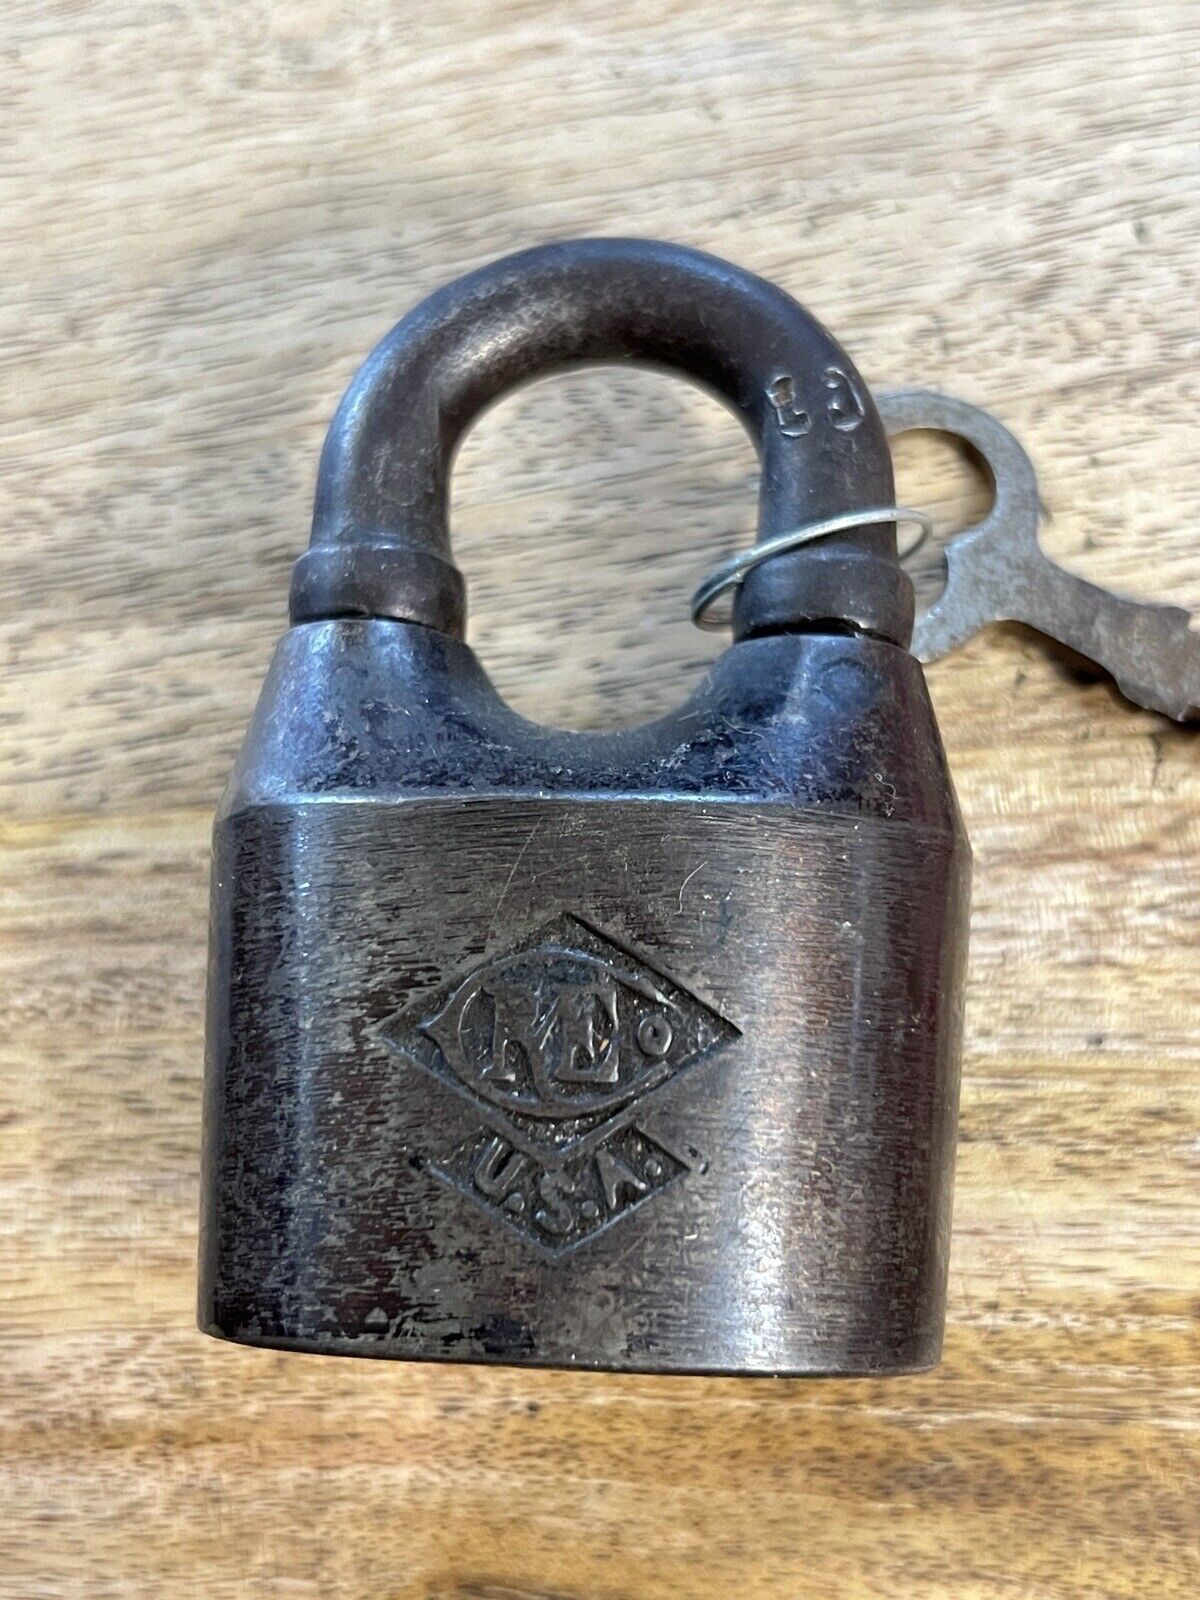 Vintage Antique Old Russell & Erwin Padlock Lock With Key